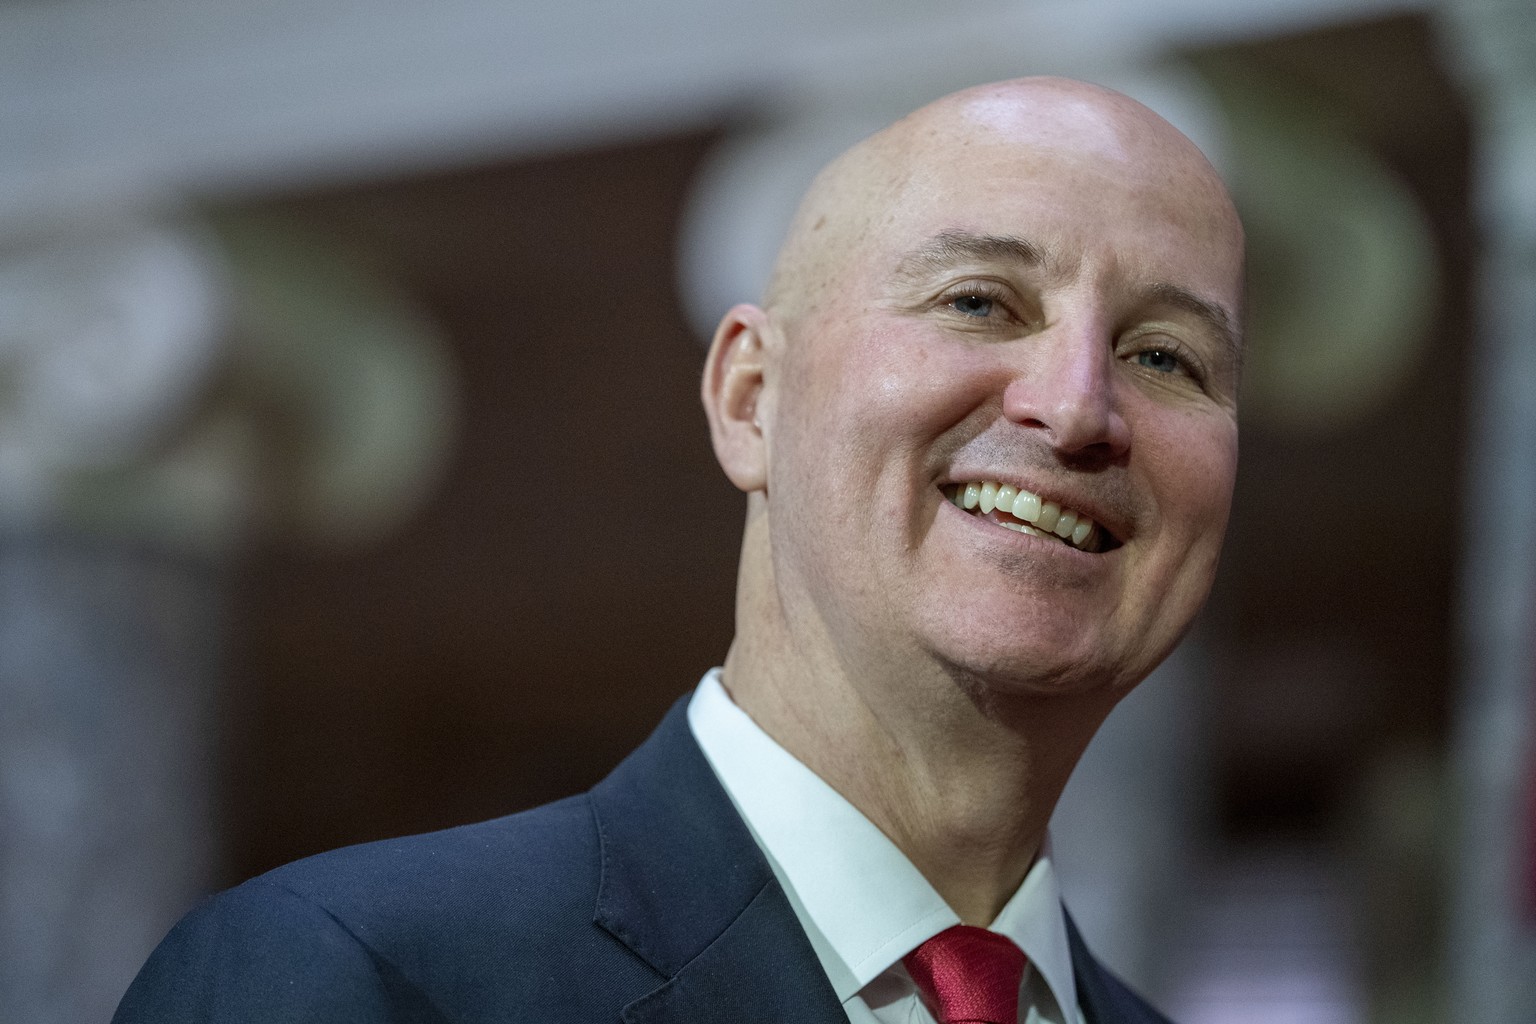 Sen. Pete Ricketts, R-Neb., smiles as Vice President Kamala Harris arrives, Monday, Jan. 23, 2023, for his ceremonial swearing-in on Capitol Hill in Washington. (AP Photo/Jacquelyn Martin)
Pete Ricket ...